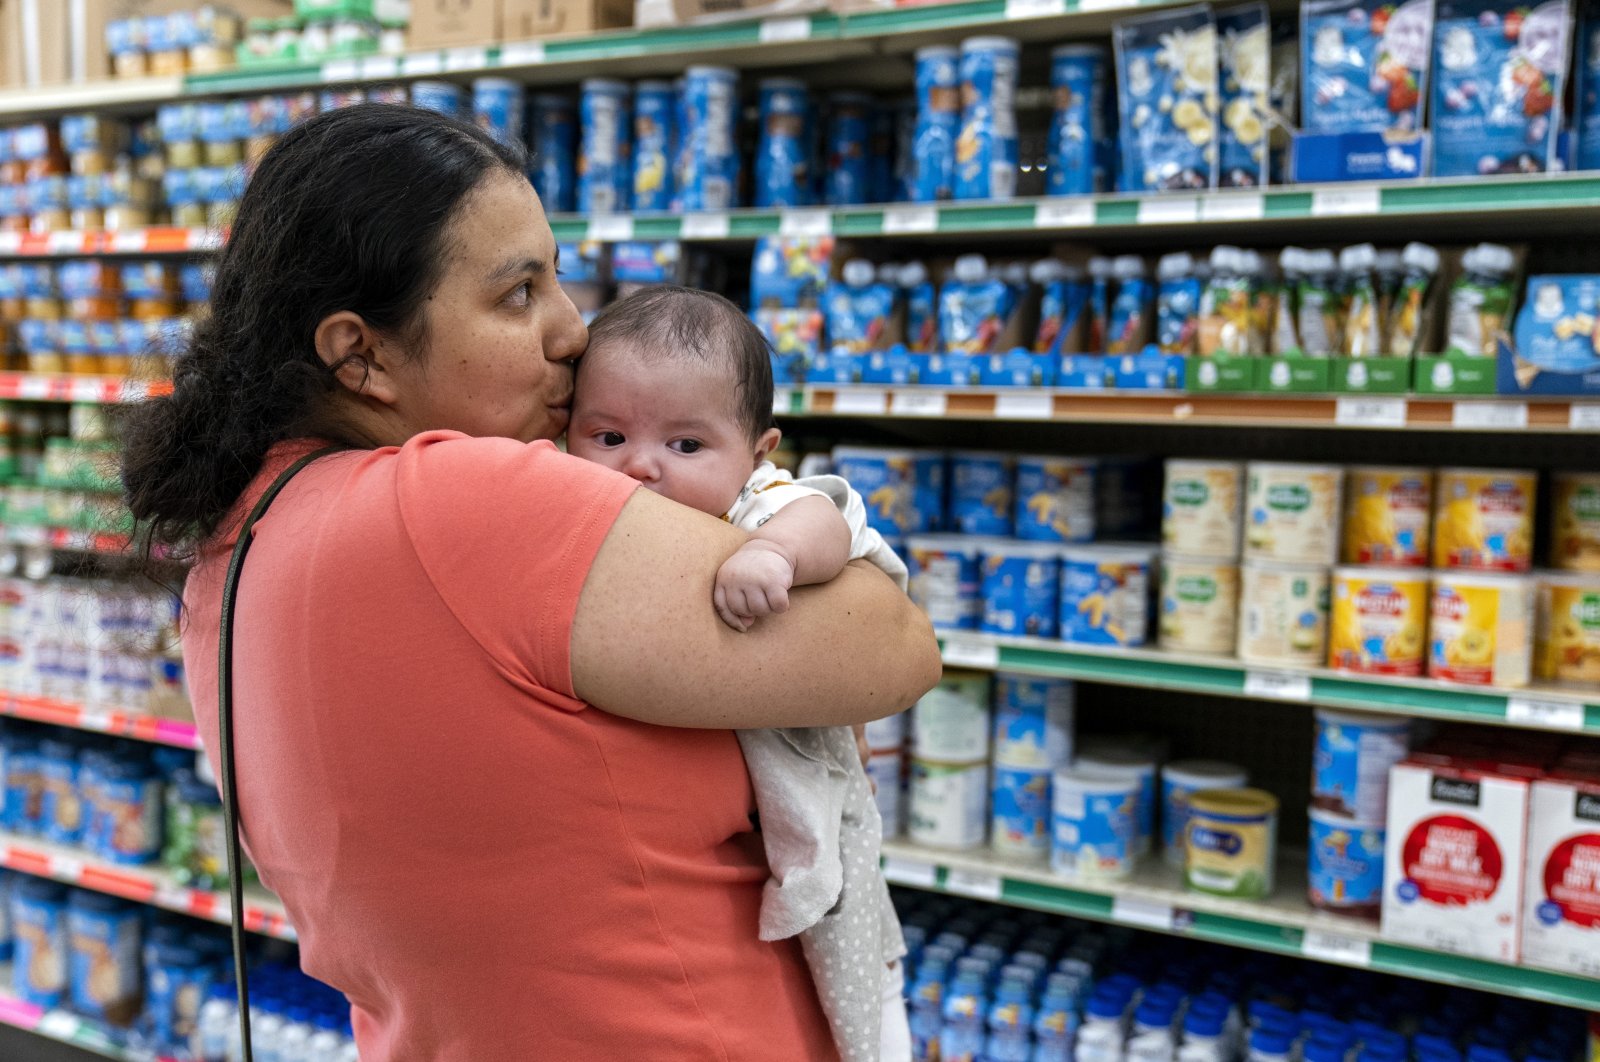 Yury Navas, 29, of Laurel, Md., kisses her two-month-old baby Ismael Galvaz, at Superbest International Market in Laurel, U.S., May 23, 2022, while looking for formula. (AP Photo/Jacquelyn Martin)